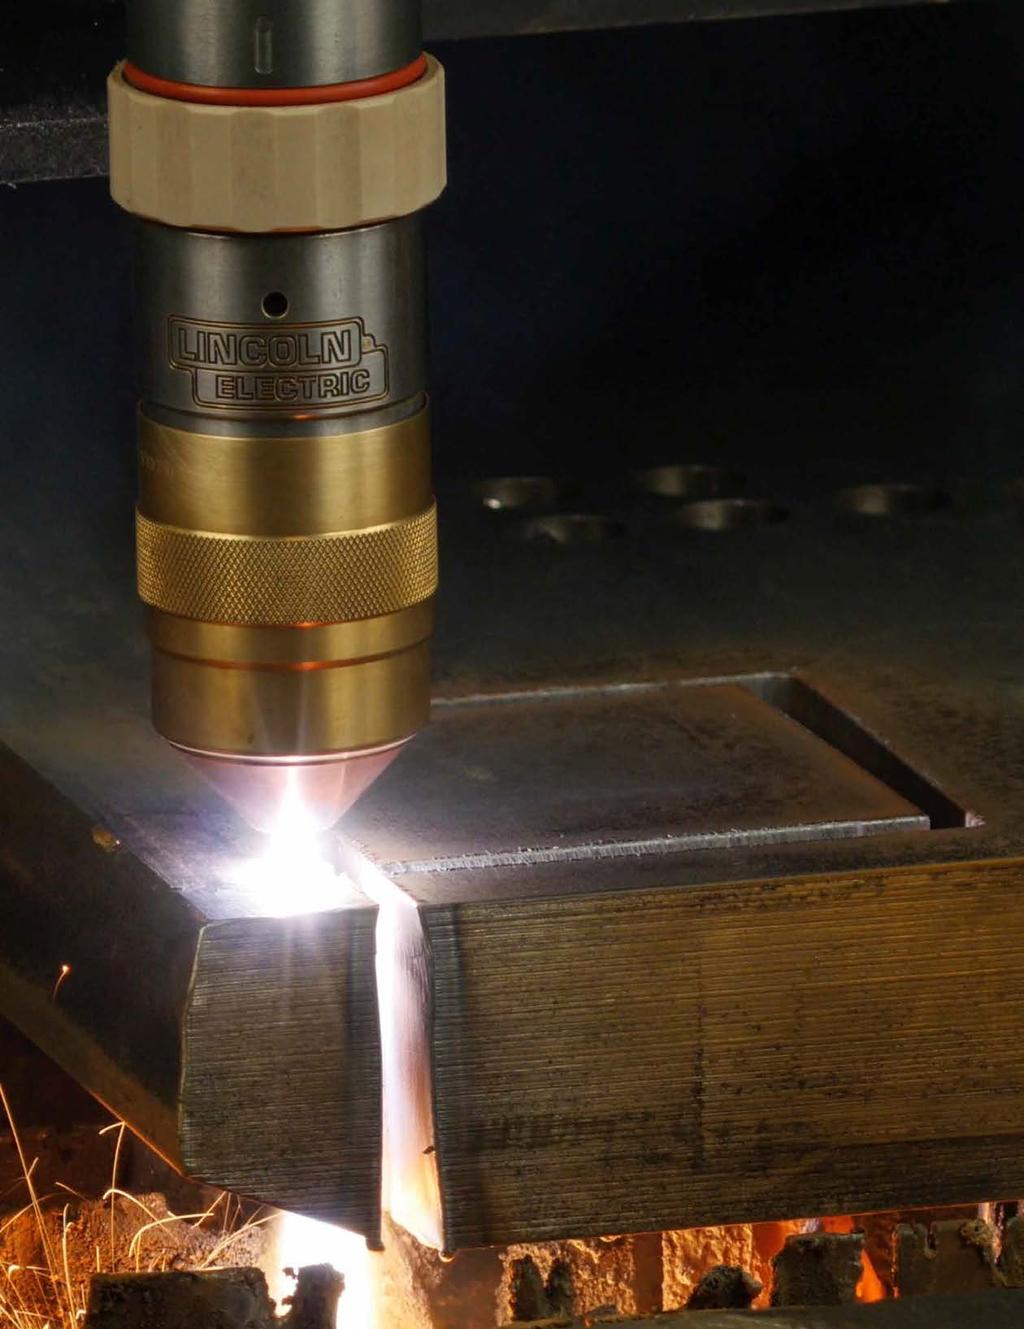 CUTTING SYSTEMS HAND-HELD PLASMA CUTTERS» Tomahawk 375 Air Tomahawk 625 Tomahawk 1000 Tomahawk 1500 CNC PLASMA CUTTING SYSTEMS» FlexCut 80 FlexCut 125 Torchmate 4400/4800 Torchmate X Series Torchmate